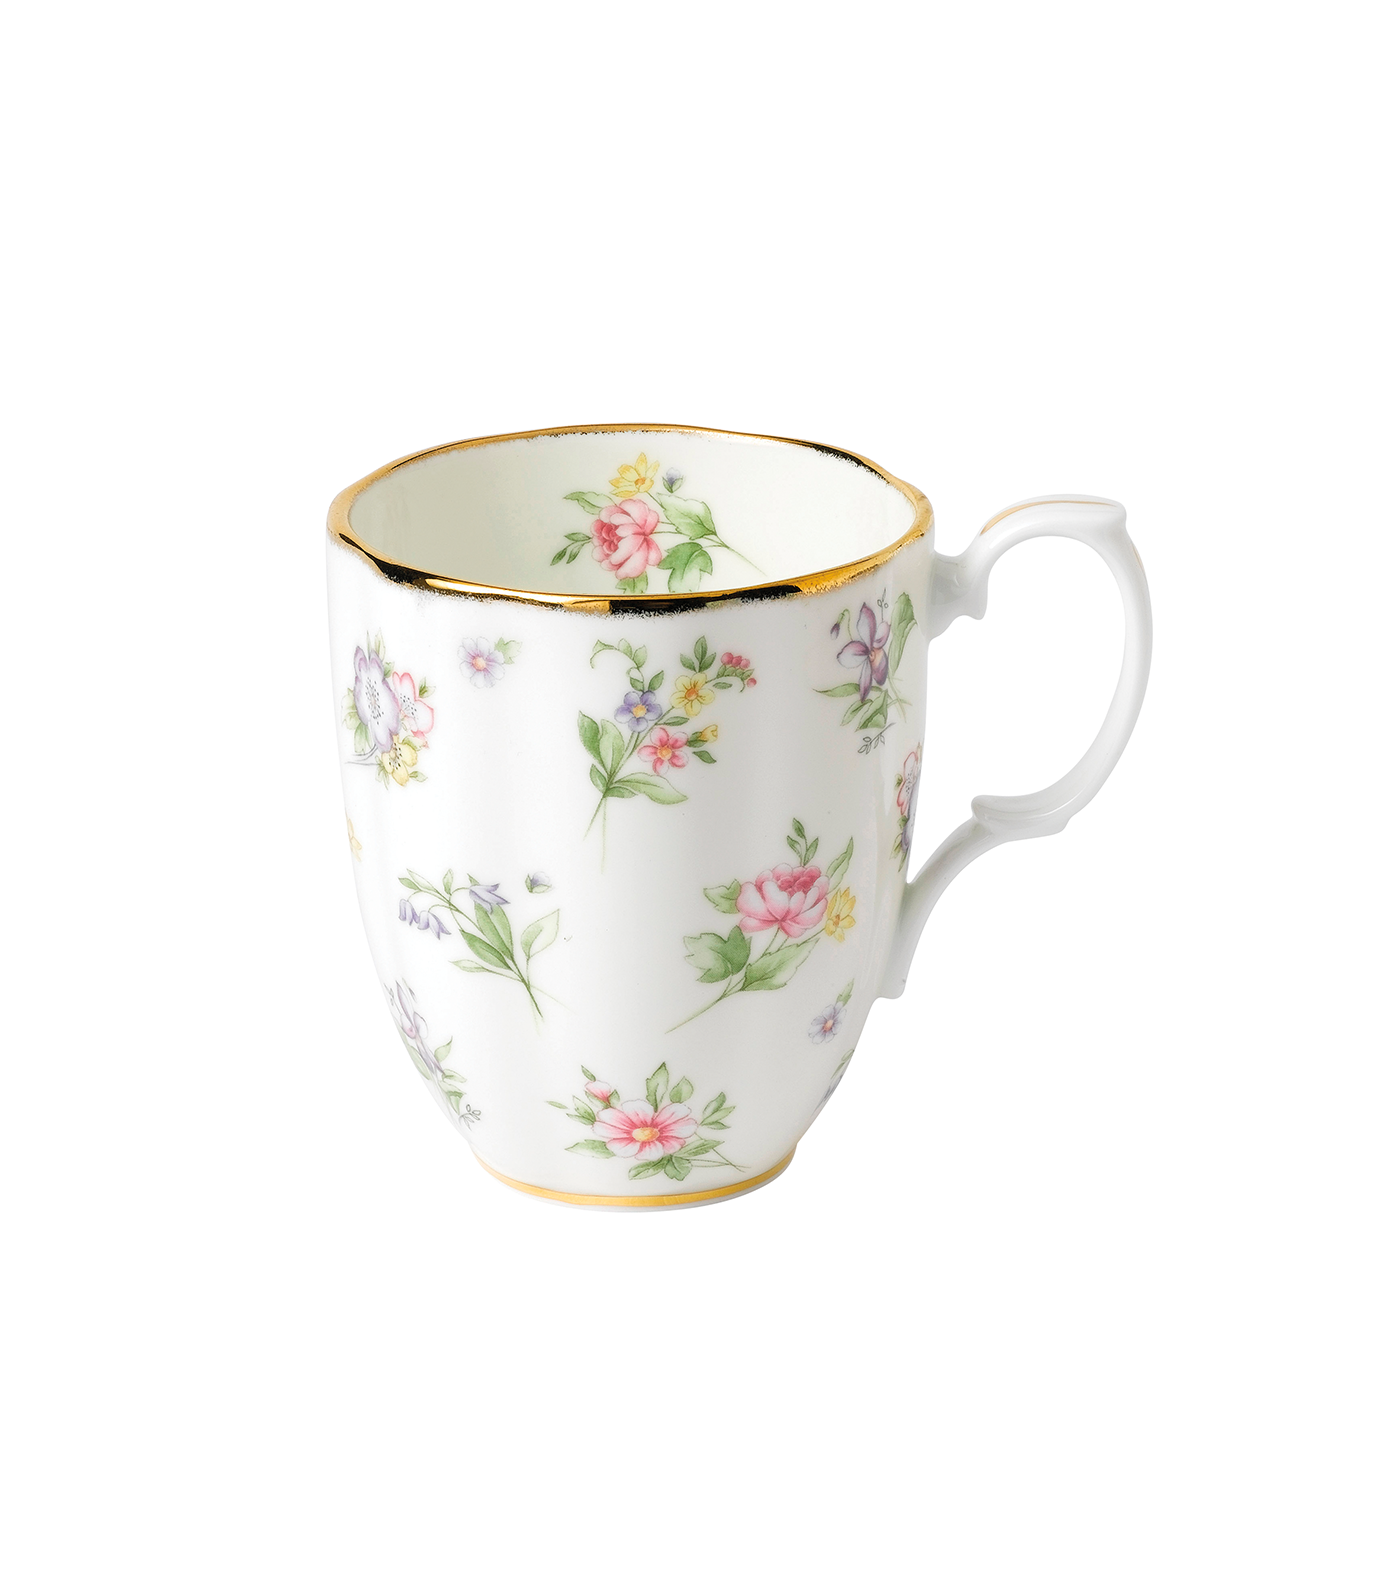 100 Years Of Royal Albert Spring Meadow 1920 Collection